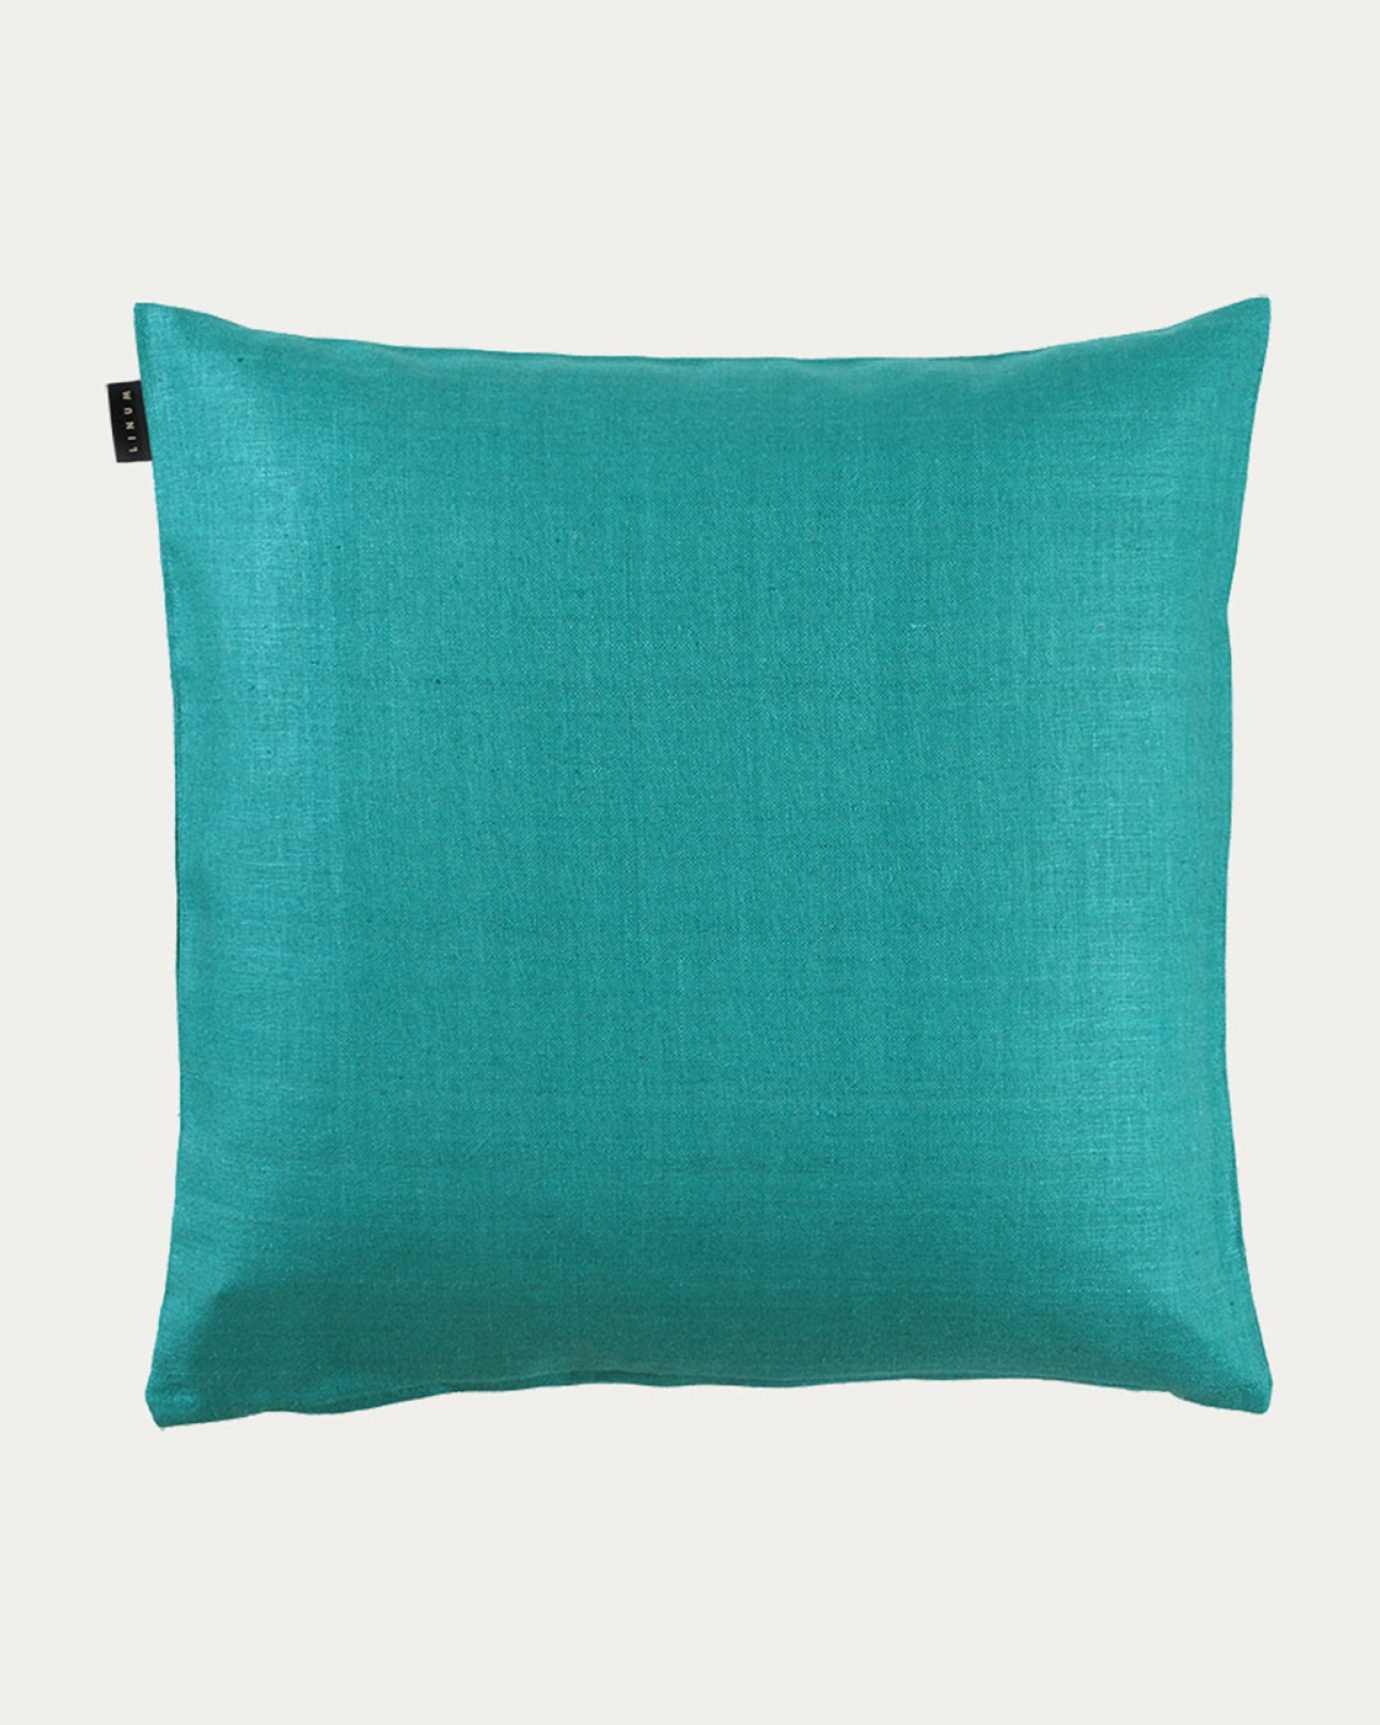 Product image aqua turquoise SETA cushion cover made of 100% raw silk that gives a nice lustre from LINUM DESIGN. Size 50x50 cm.